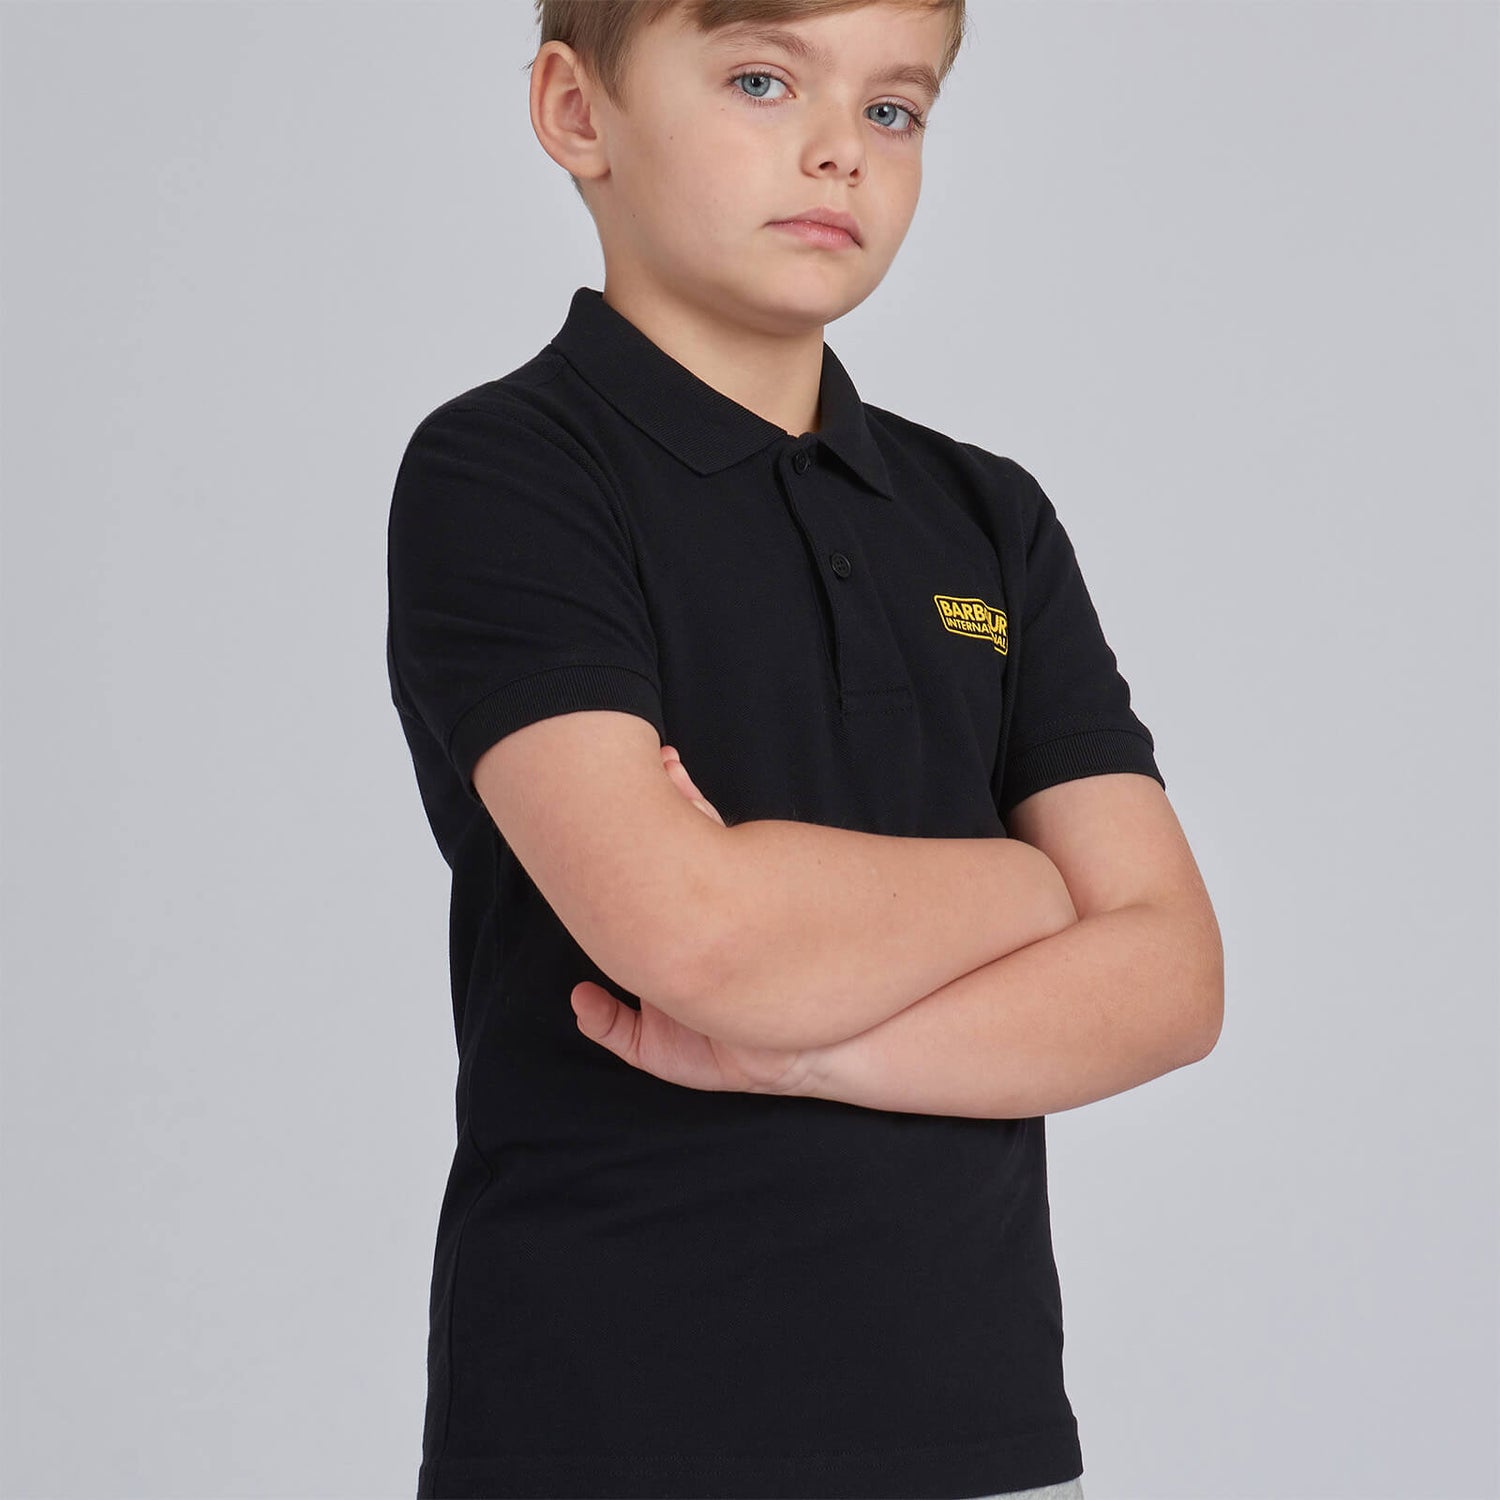 Barbour International Boys' Essential Polo - Black - S (6-7 Years)